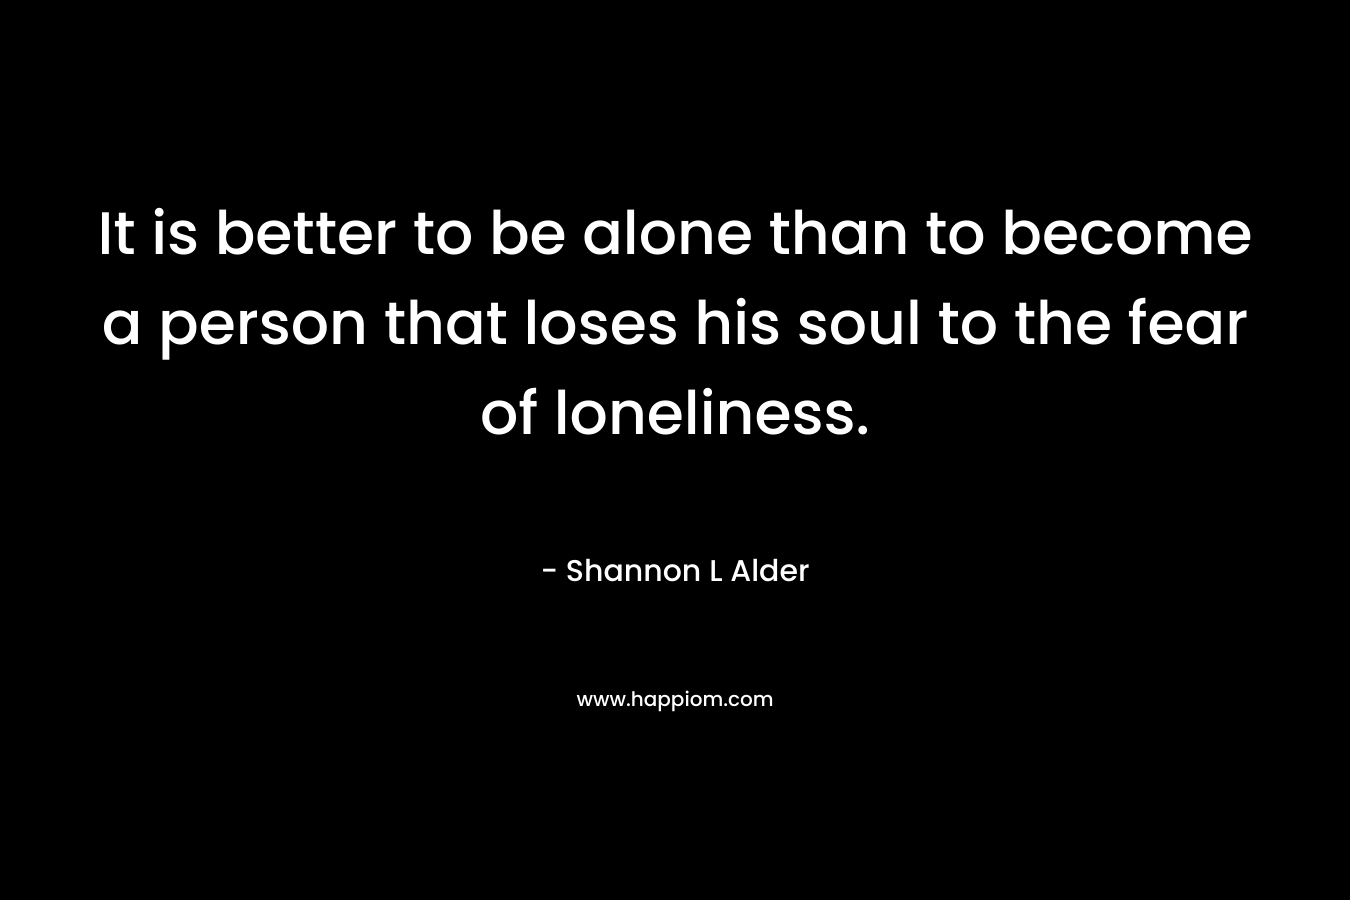 It is better to be alone than to become a person that loses his soul to the fear of loneliness.